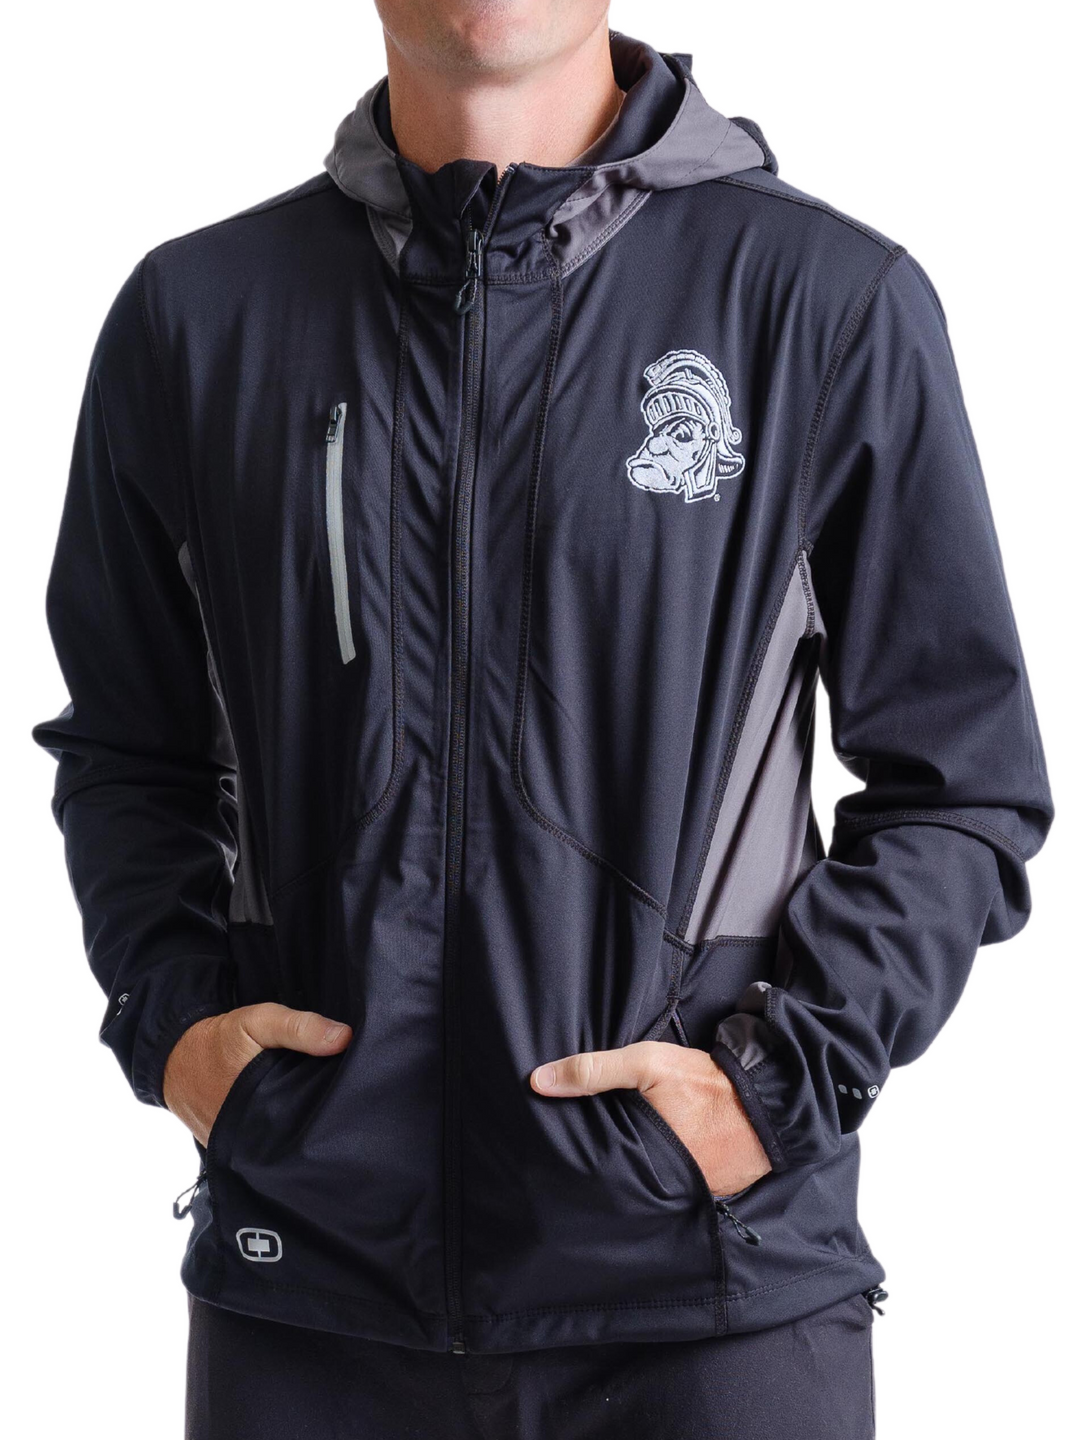 Performance Michigan State Jacket with Gruff Sparty